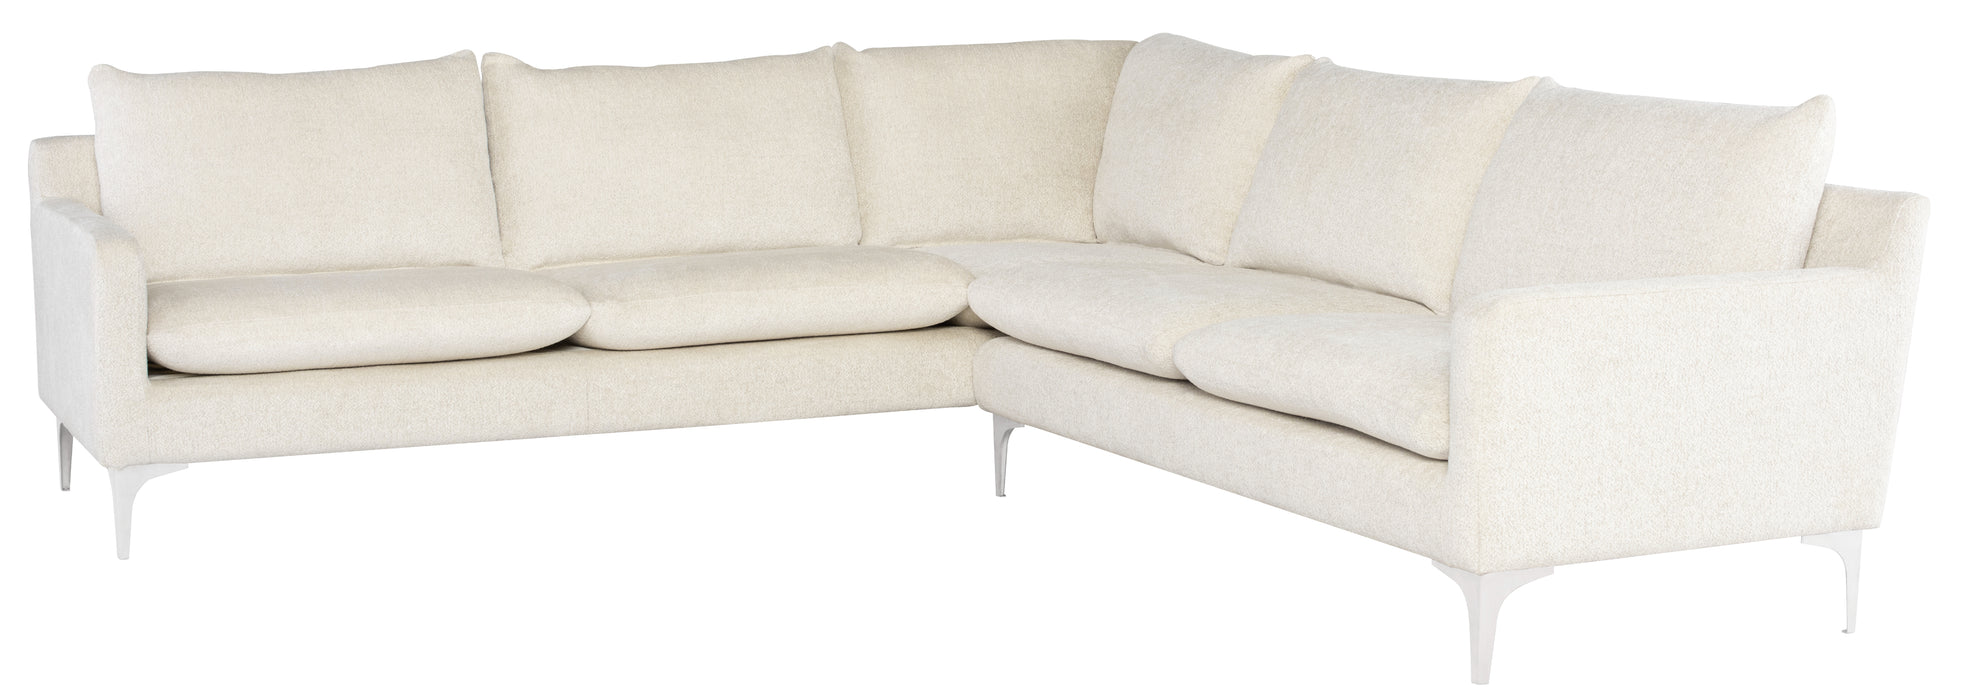 Anders NL Coconut Sectional Sofa